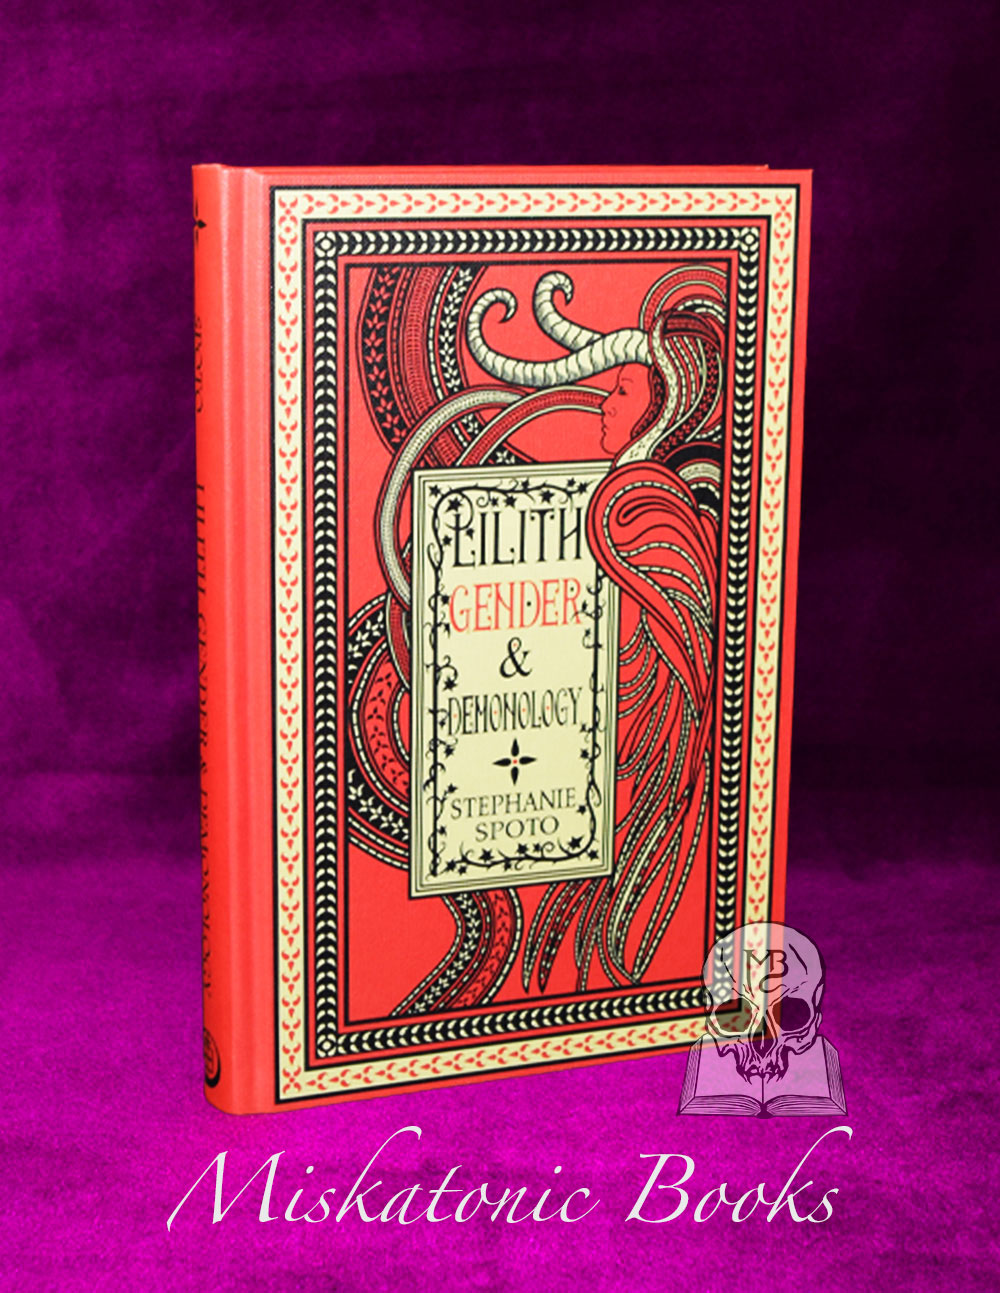 LILITH, GENDER AND DEMONOLOGY by Stephanie Spoto - Limited Edition Hardcover